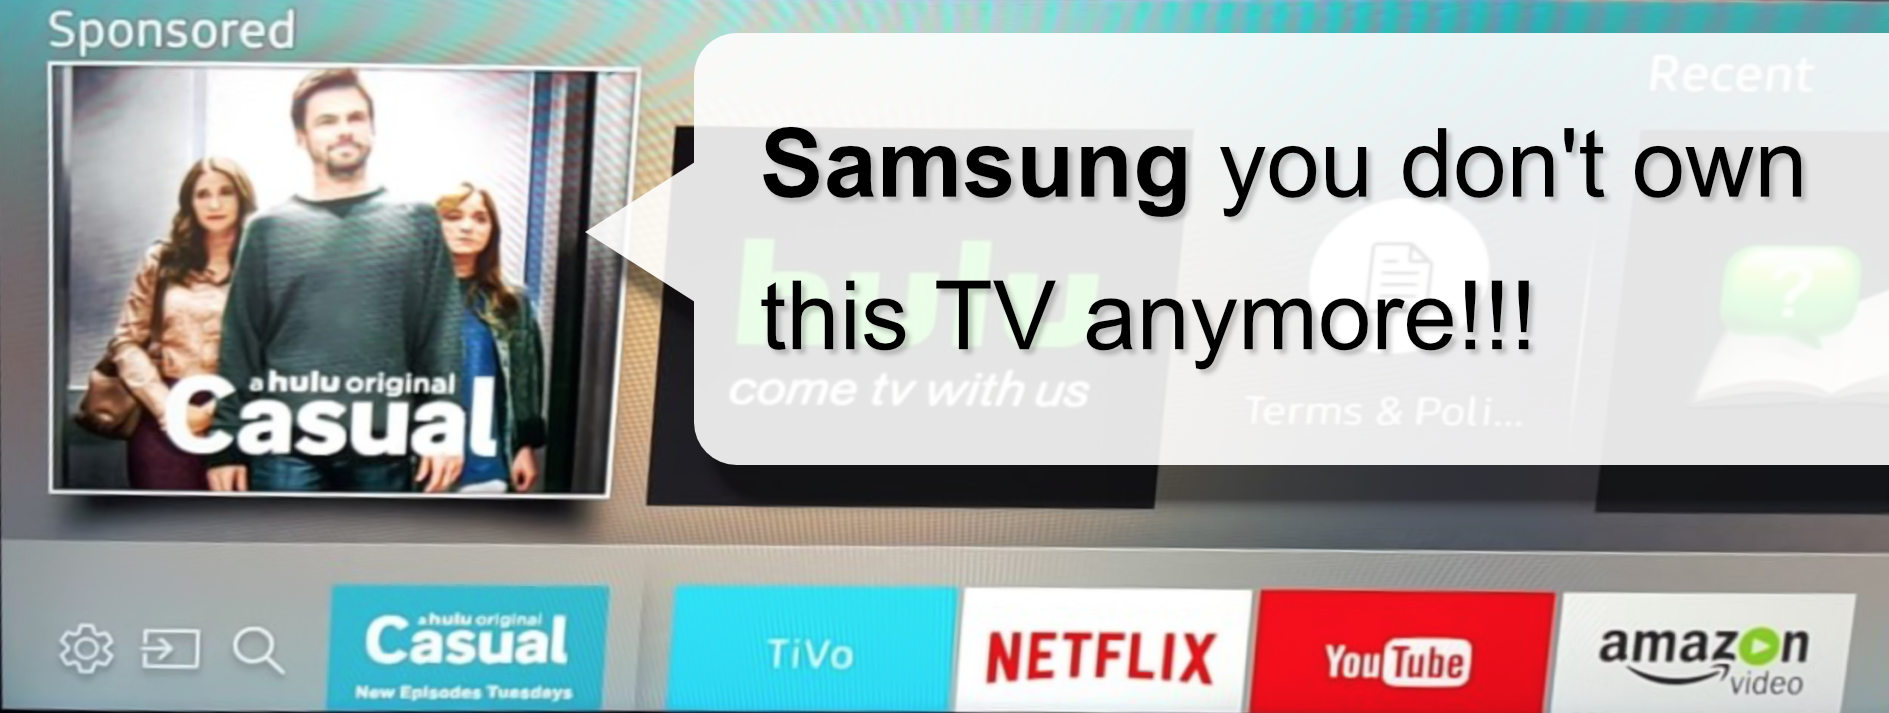 Samsung ads on YOUR TV!